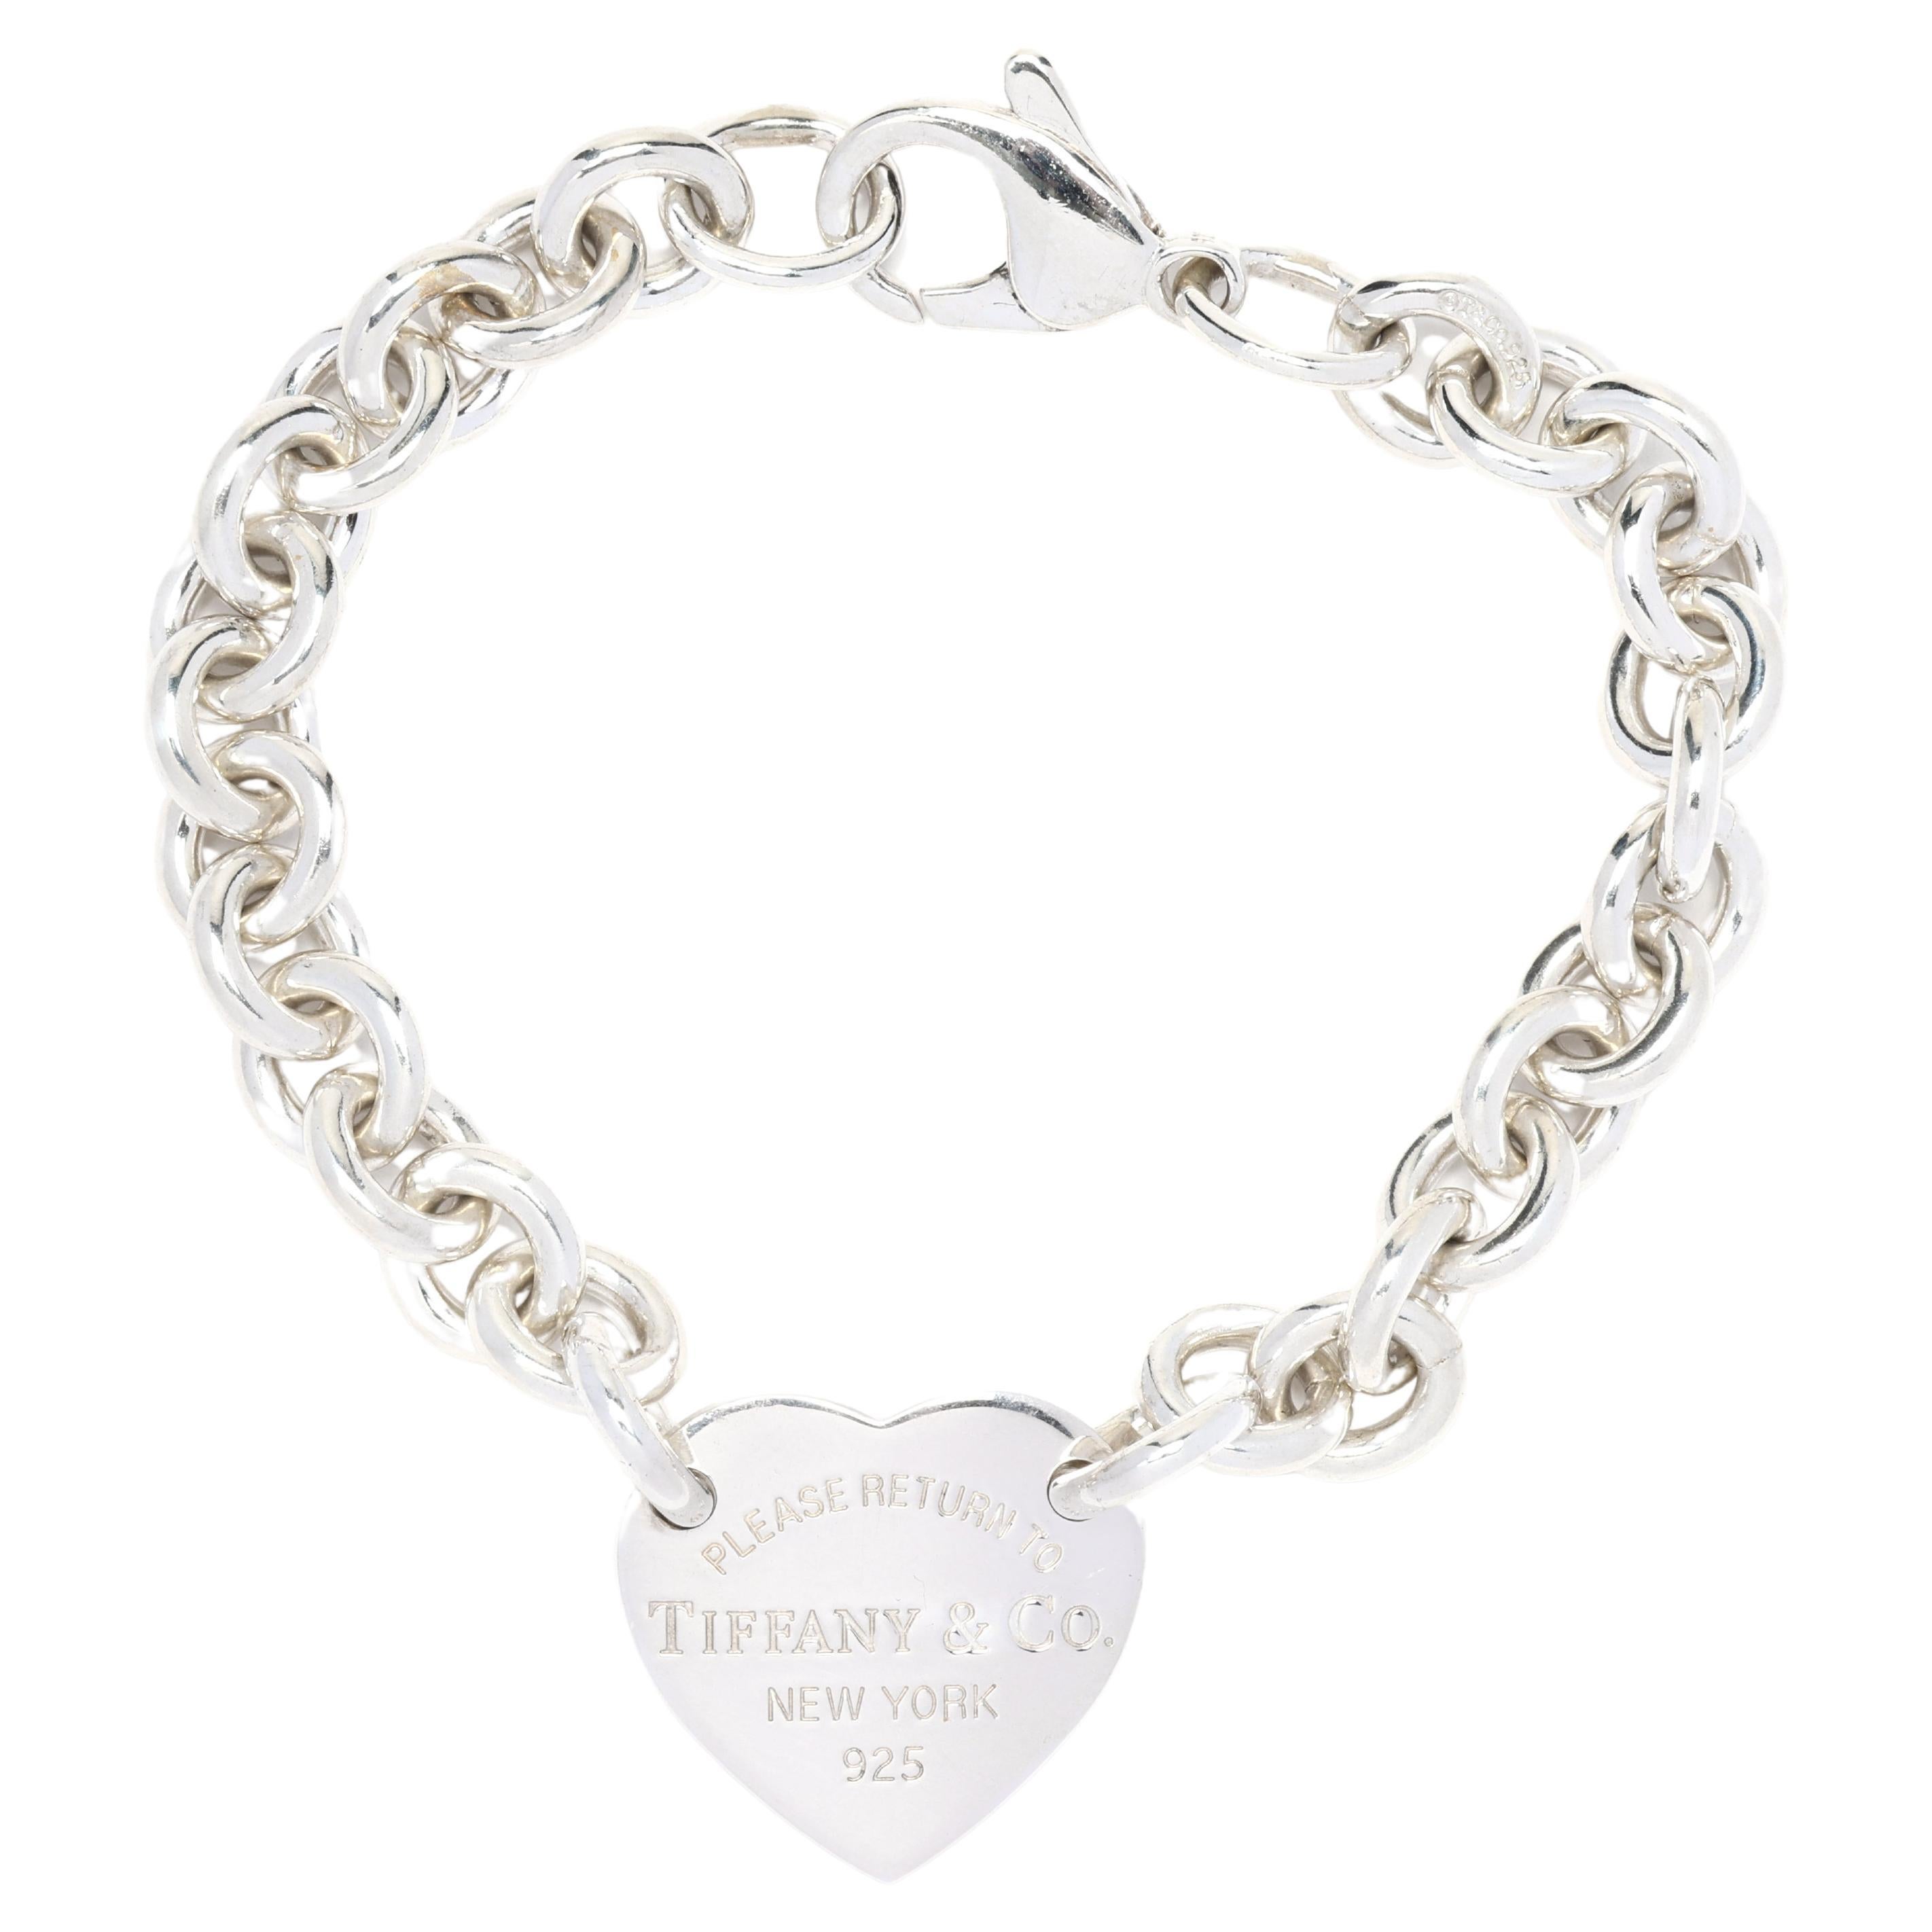 Tiffany and Co Heart Chain Bracelet, Sterling Silver, Length 7 Inches, Designer For Sale